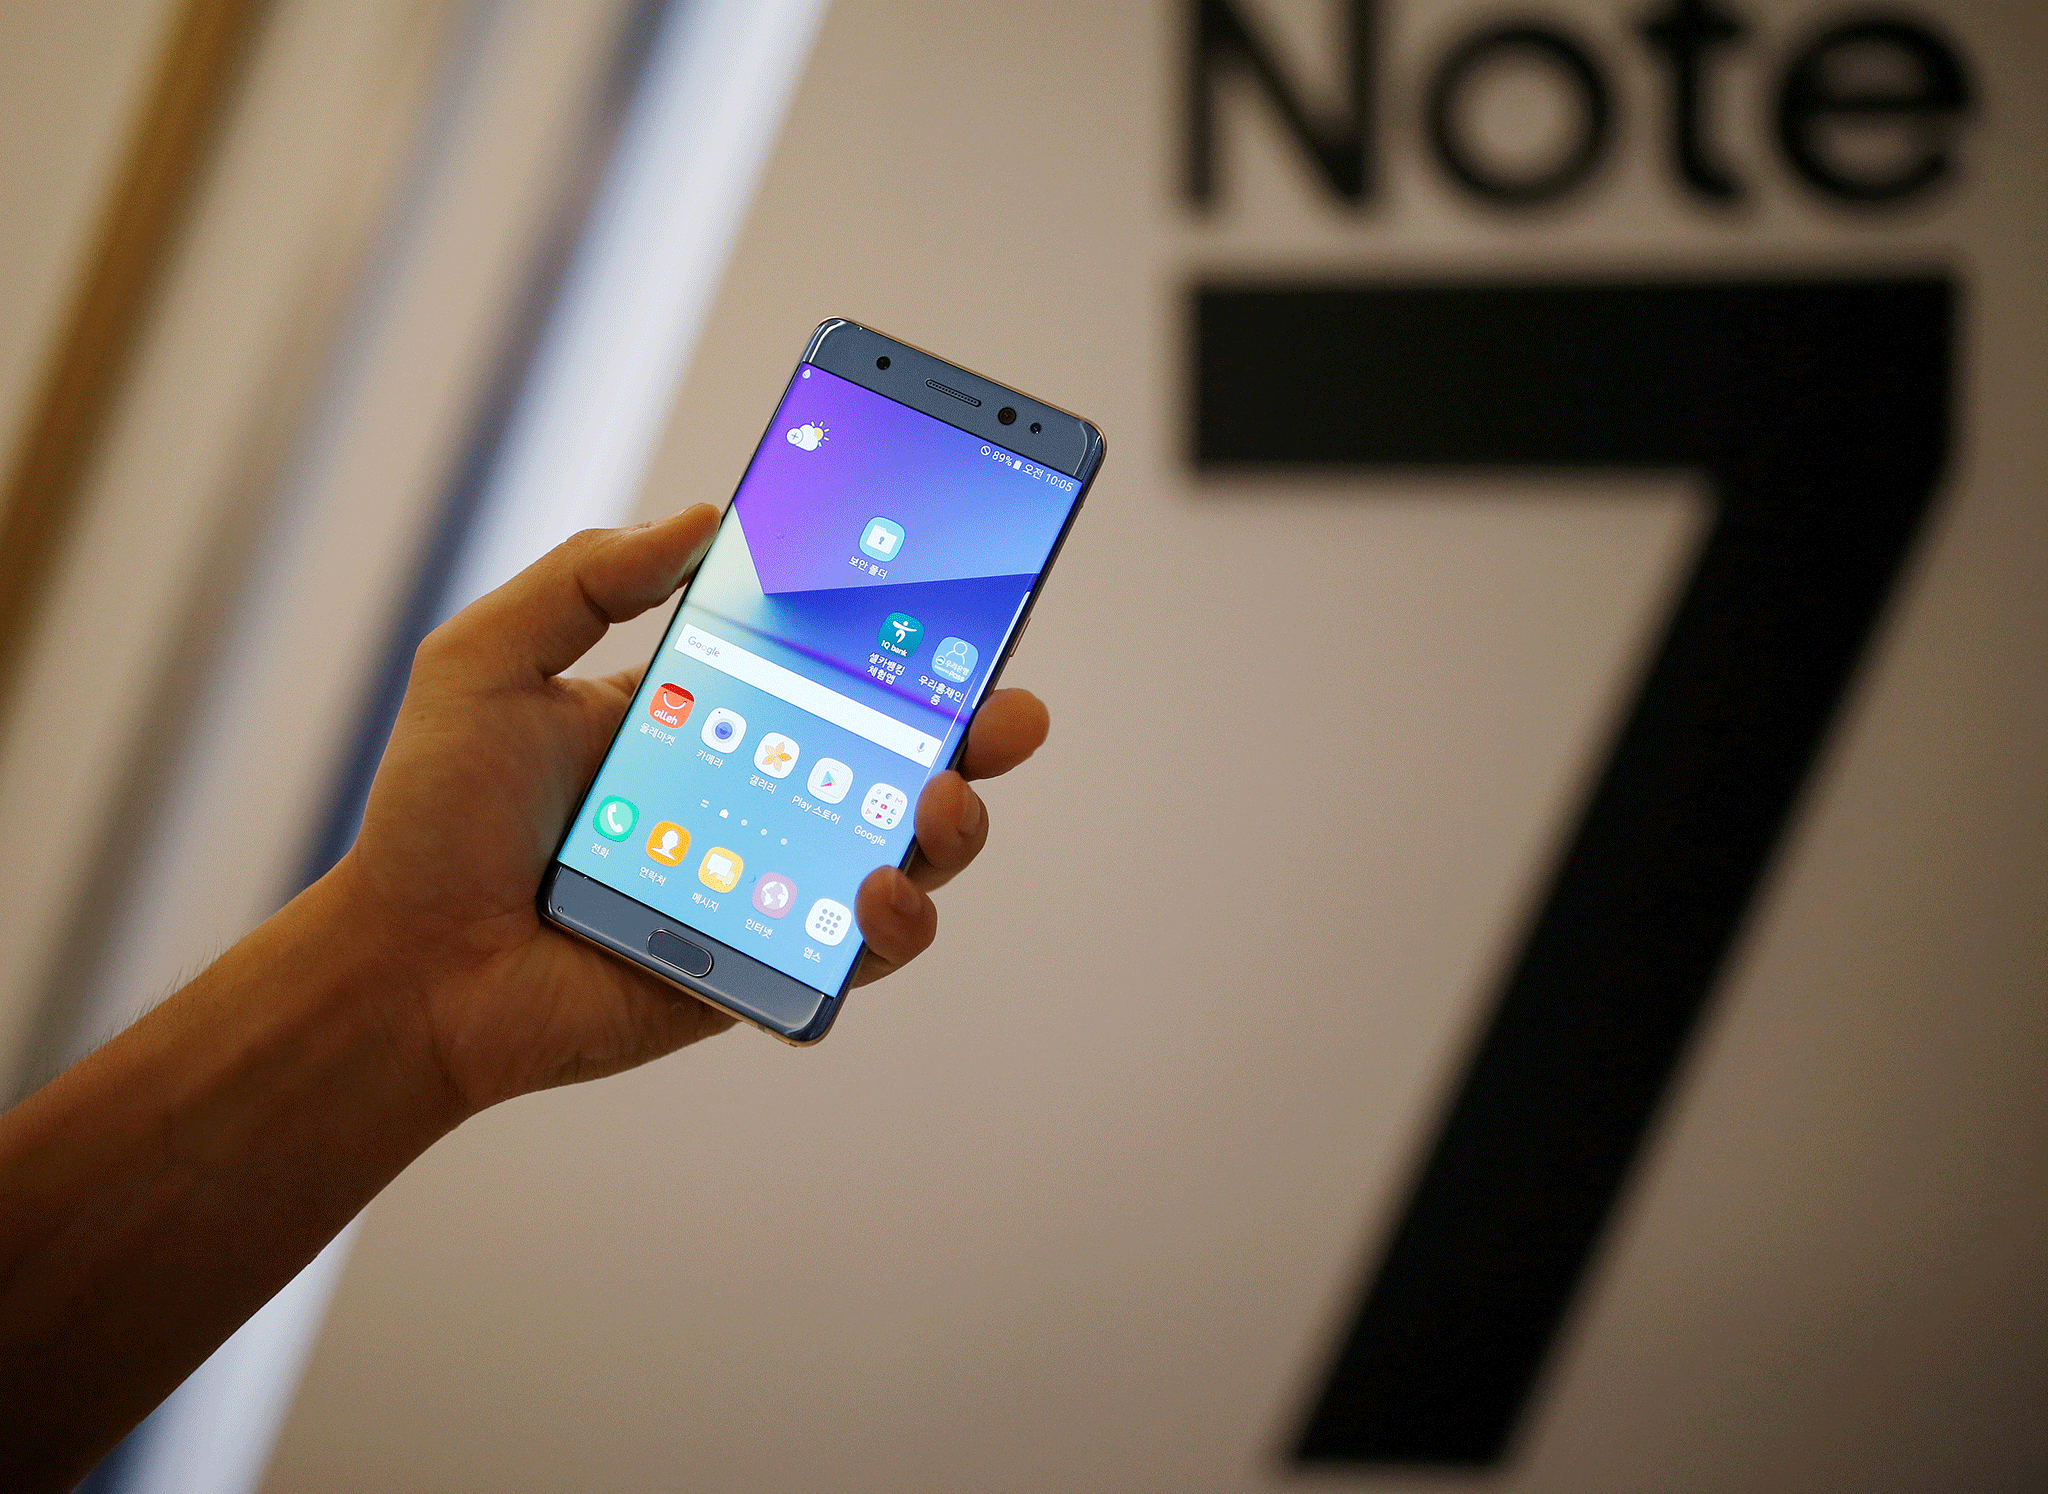  Samsung's Galaxy Note 7 smartphone at its launch in August. The device has now been officially axed